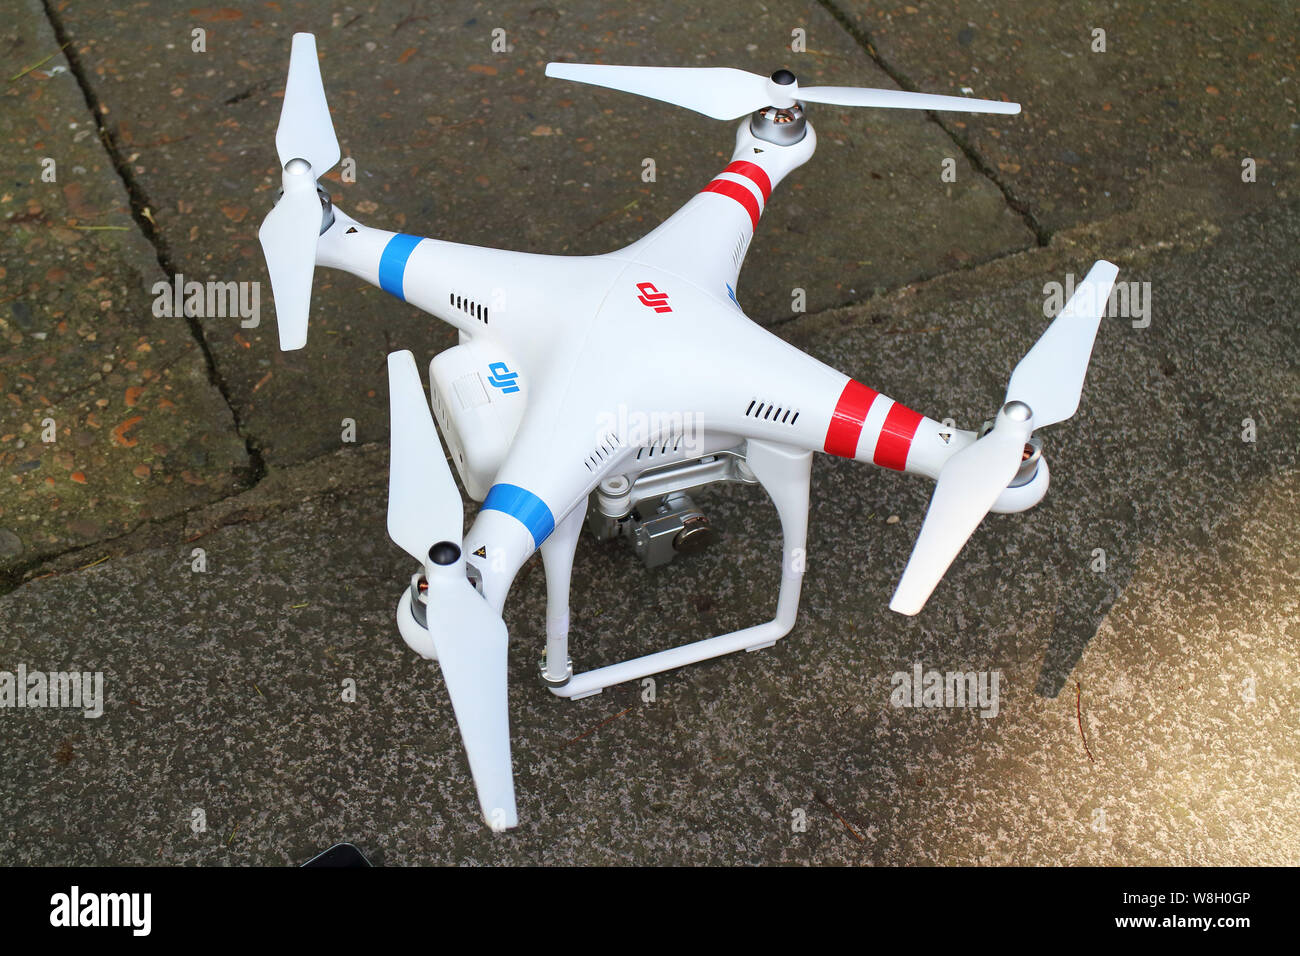 FILE--A Phantom 2 Vision+ unmanned aerial vehicle (UAV), or drone, of DJI ( Dajiang Innovations) hovers in Fuzhou city, southeast China's Fujian prov  Stock Photo - Alamy